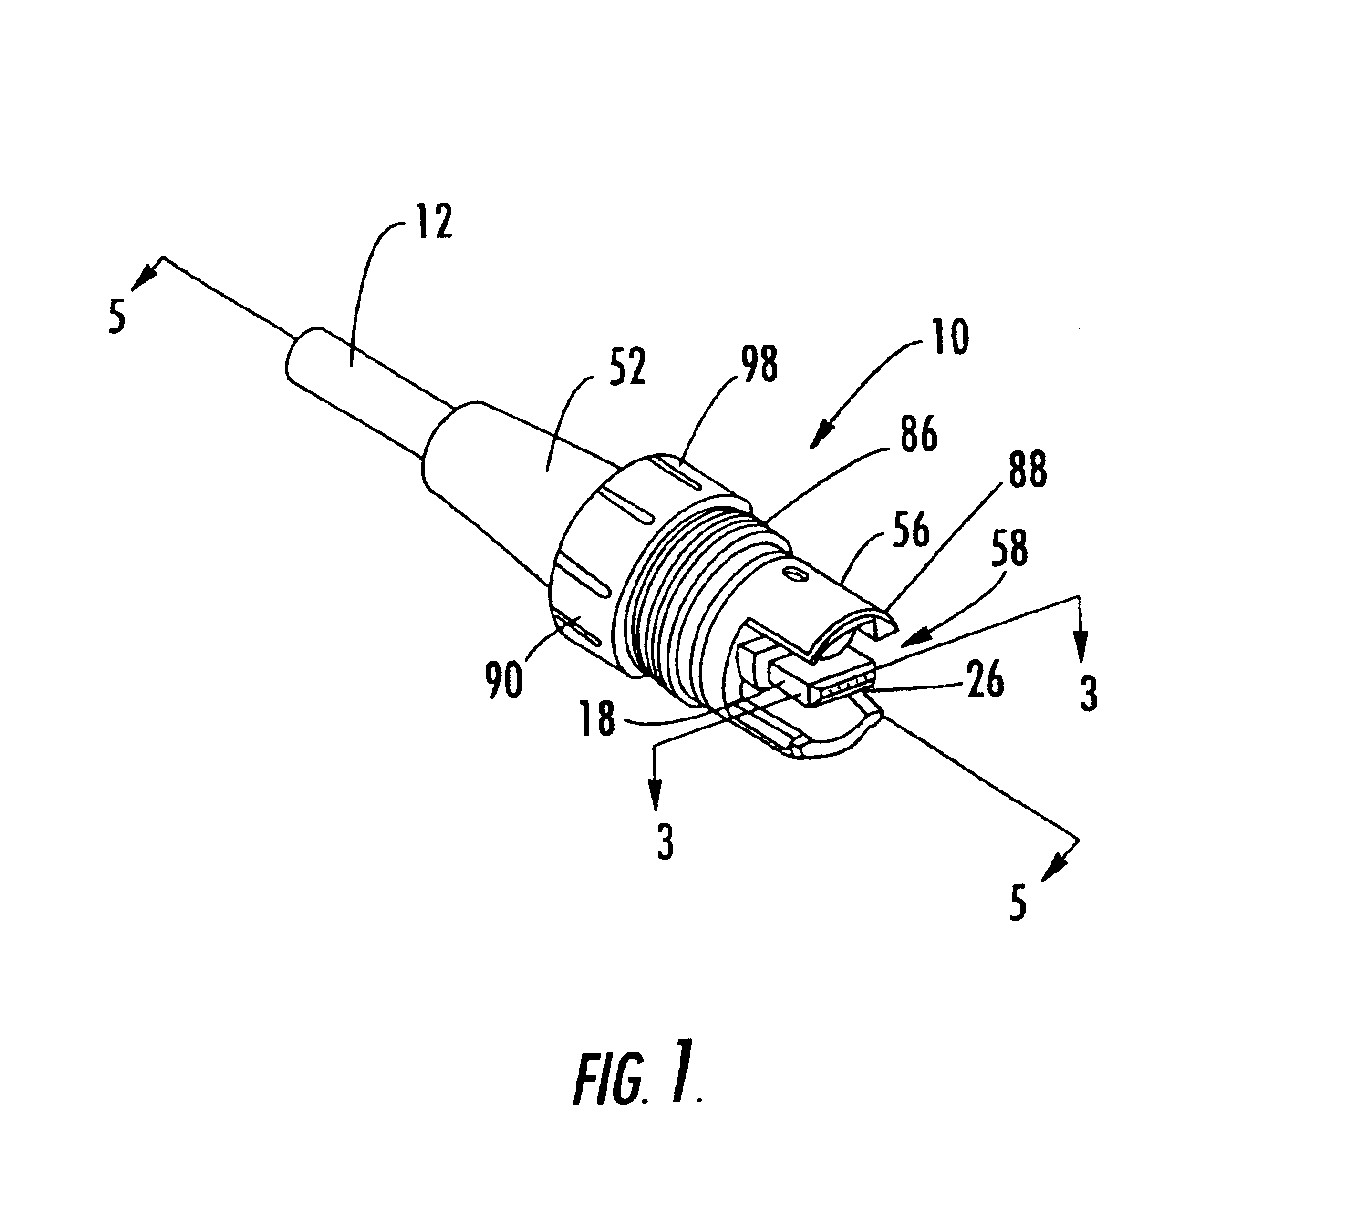 Fiber optic plug and receptacle assembly